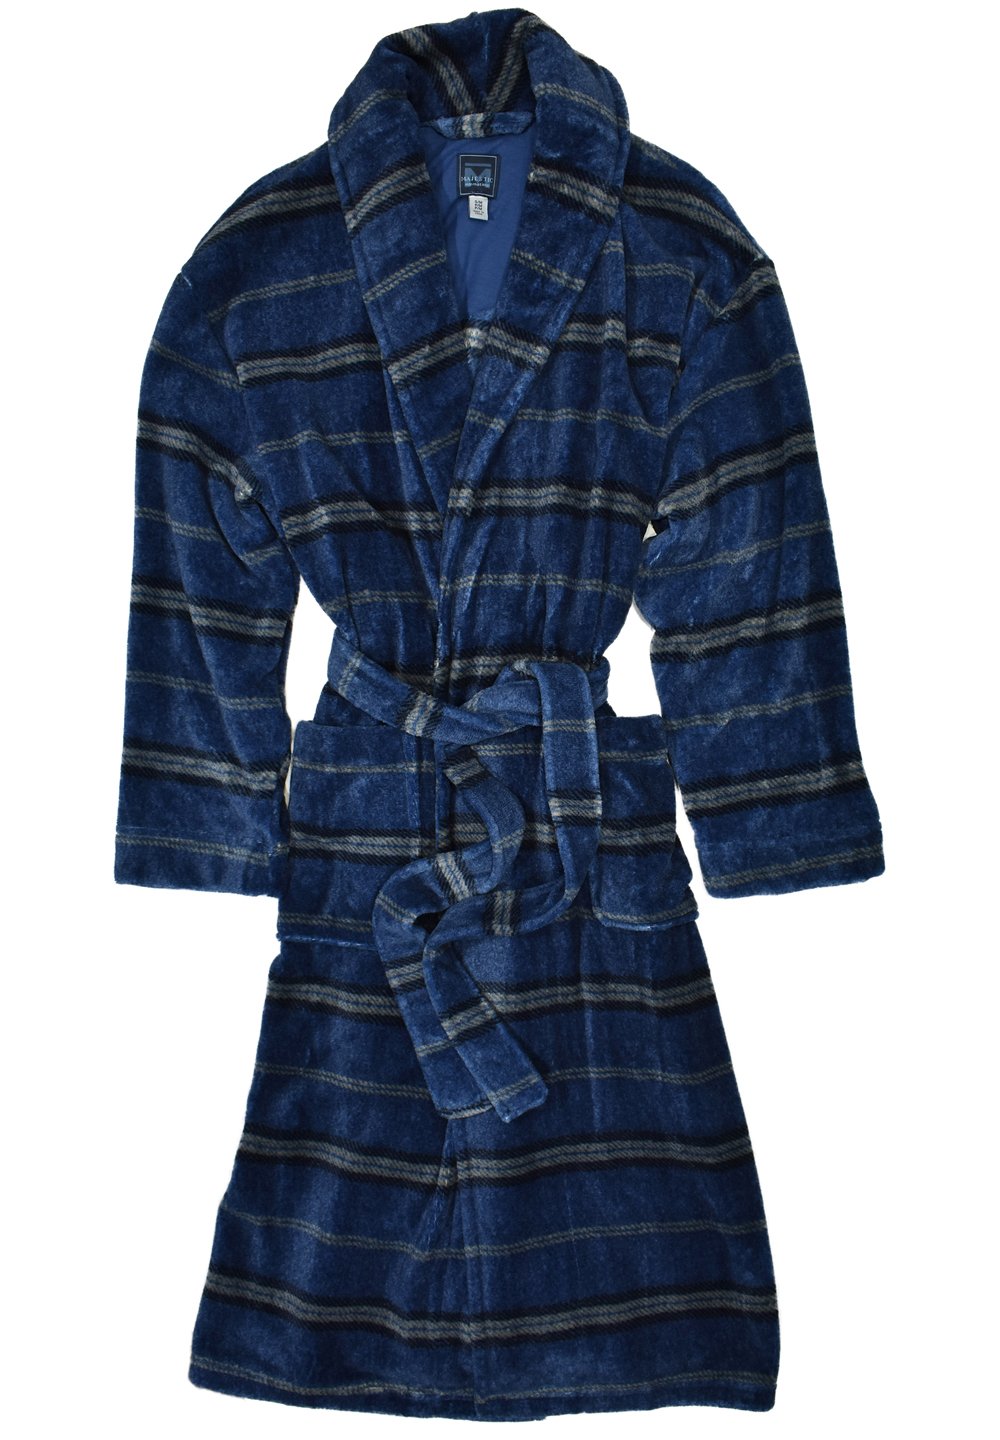 Wrap yourself in this plush robe and you’ll never want to take it off. Super soft and comfy it is an ideal gift for him or her!   Traditional yet updated fashion plaid pattern.  Indigo Plaid Plush Robe  Plush microfiber is super soft and easy care. Medium weight. Tie belt front. Classic front patch pockets. Small/Medium or Large/X-Large.